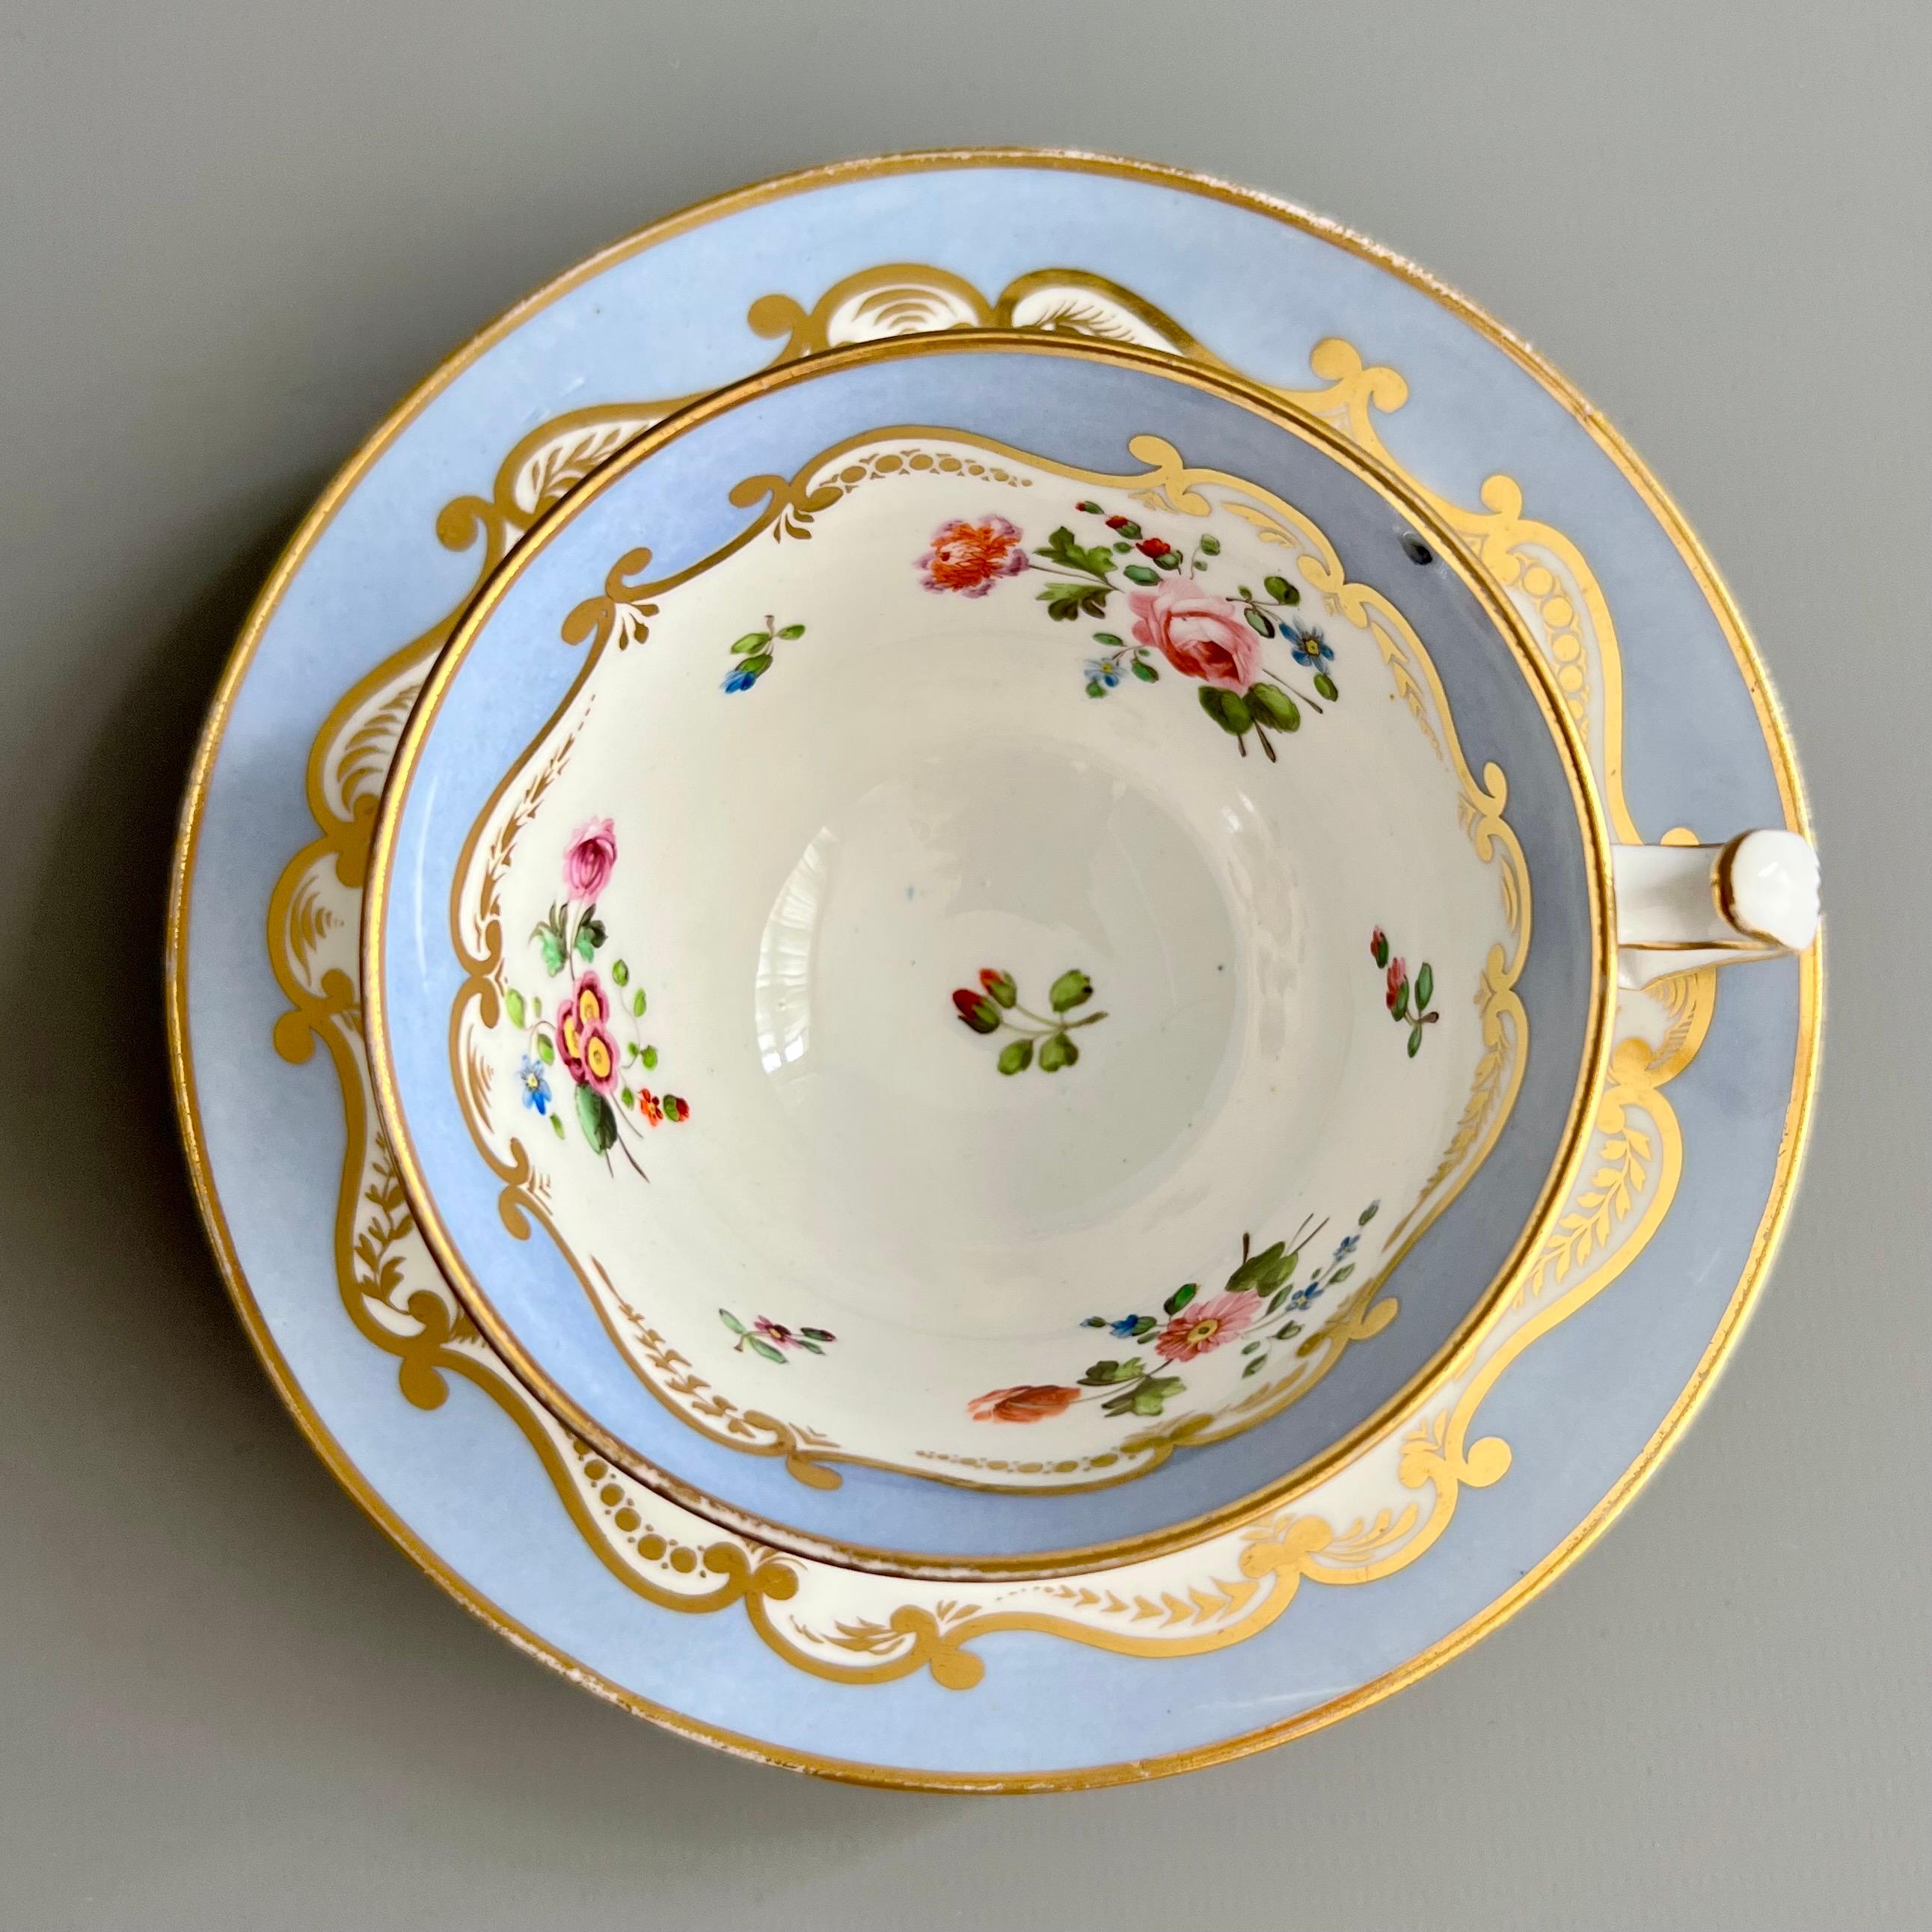 Spode Porcelain Teacup Trio, Lavender Blue with Flower Sprays, Regency ca 1815 In Good Condition For Sale In London, GB